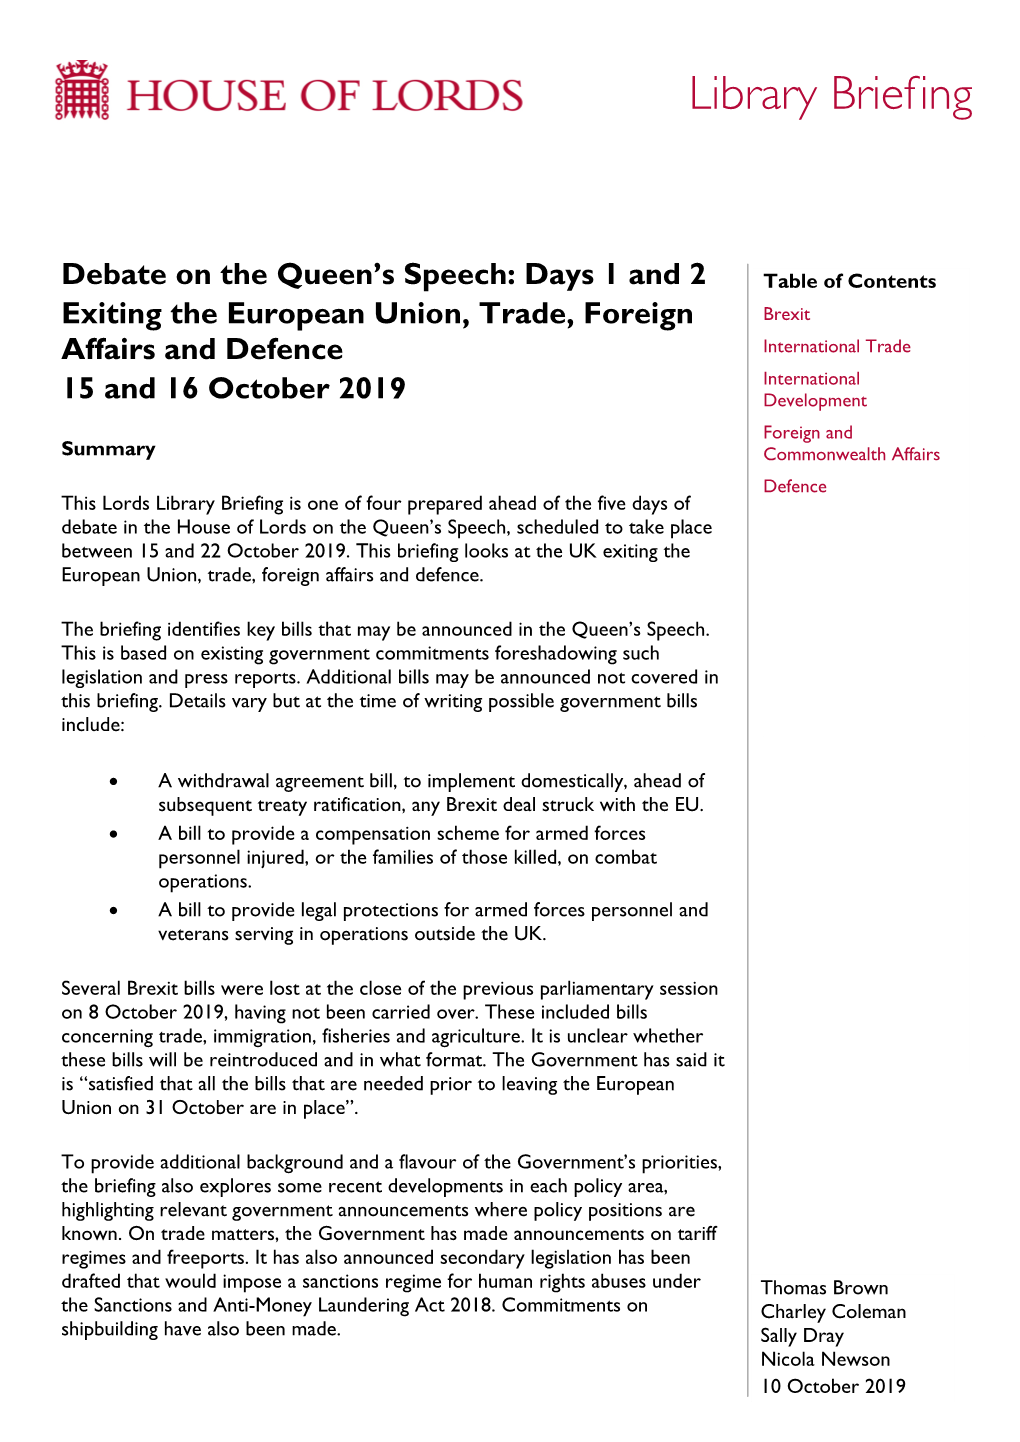 Debate on the 2019 Queen's Speech in the House of Lords